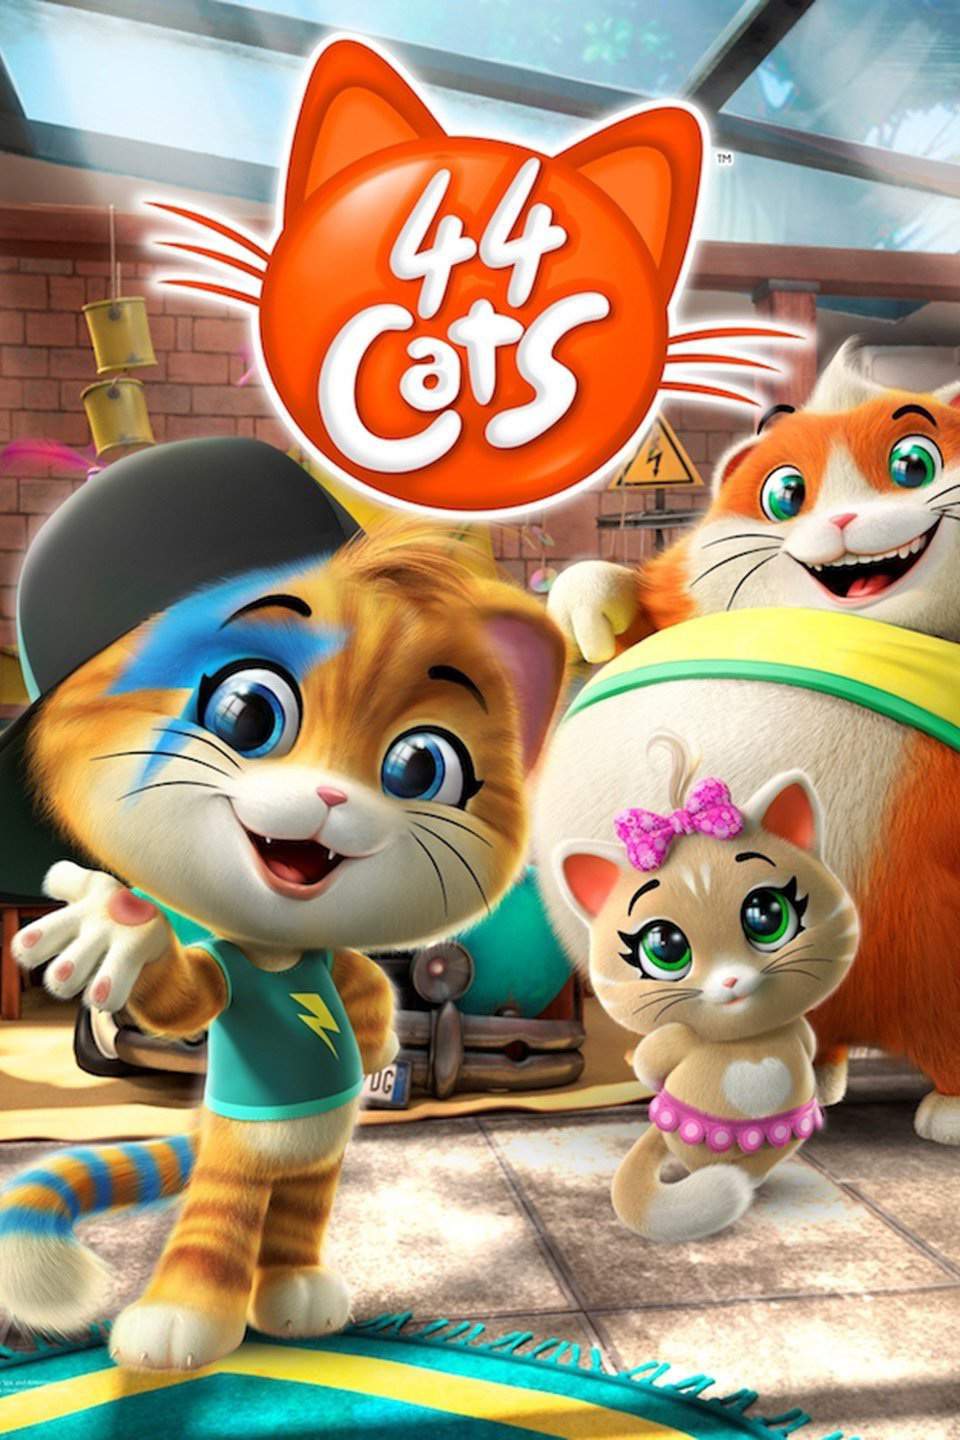 44 cats review is it a good addition to the Nickelodeon